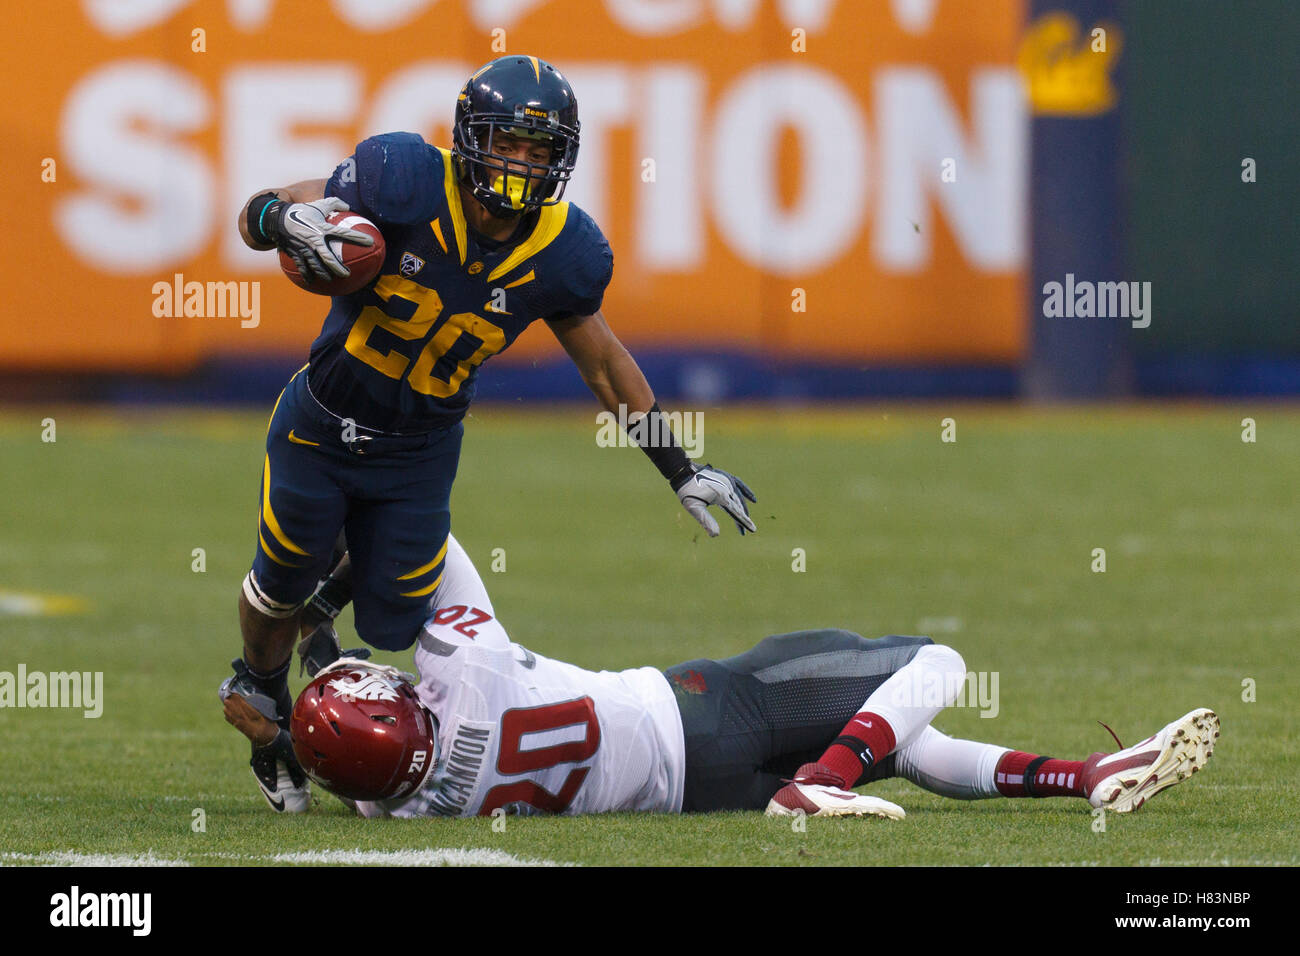 Nov 5, 2011; San Francisco CA, USA;  California Golden Bears running back Isi Sofele (20) is tackled by Washington State Cougars safety Deone Bucannon (20) during the second quarter at AT&T Park.  California defeated Washington State 30-7. Stock Photo